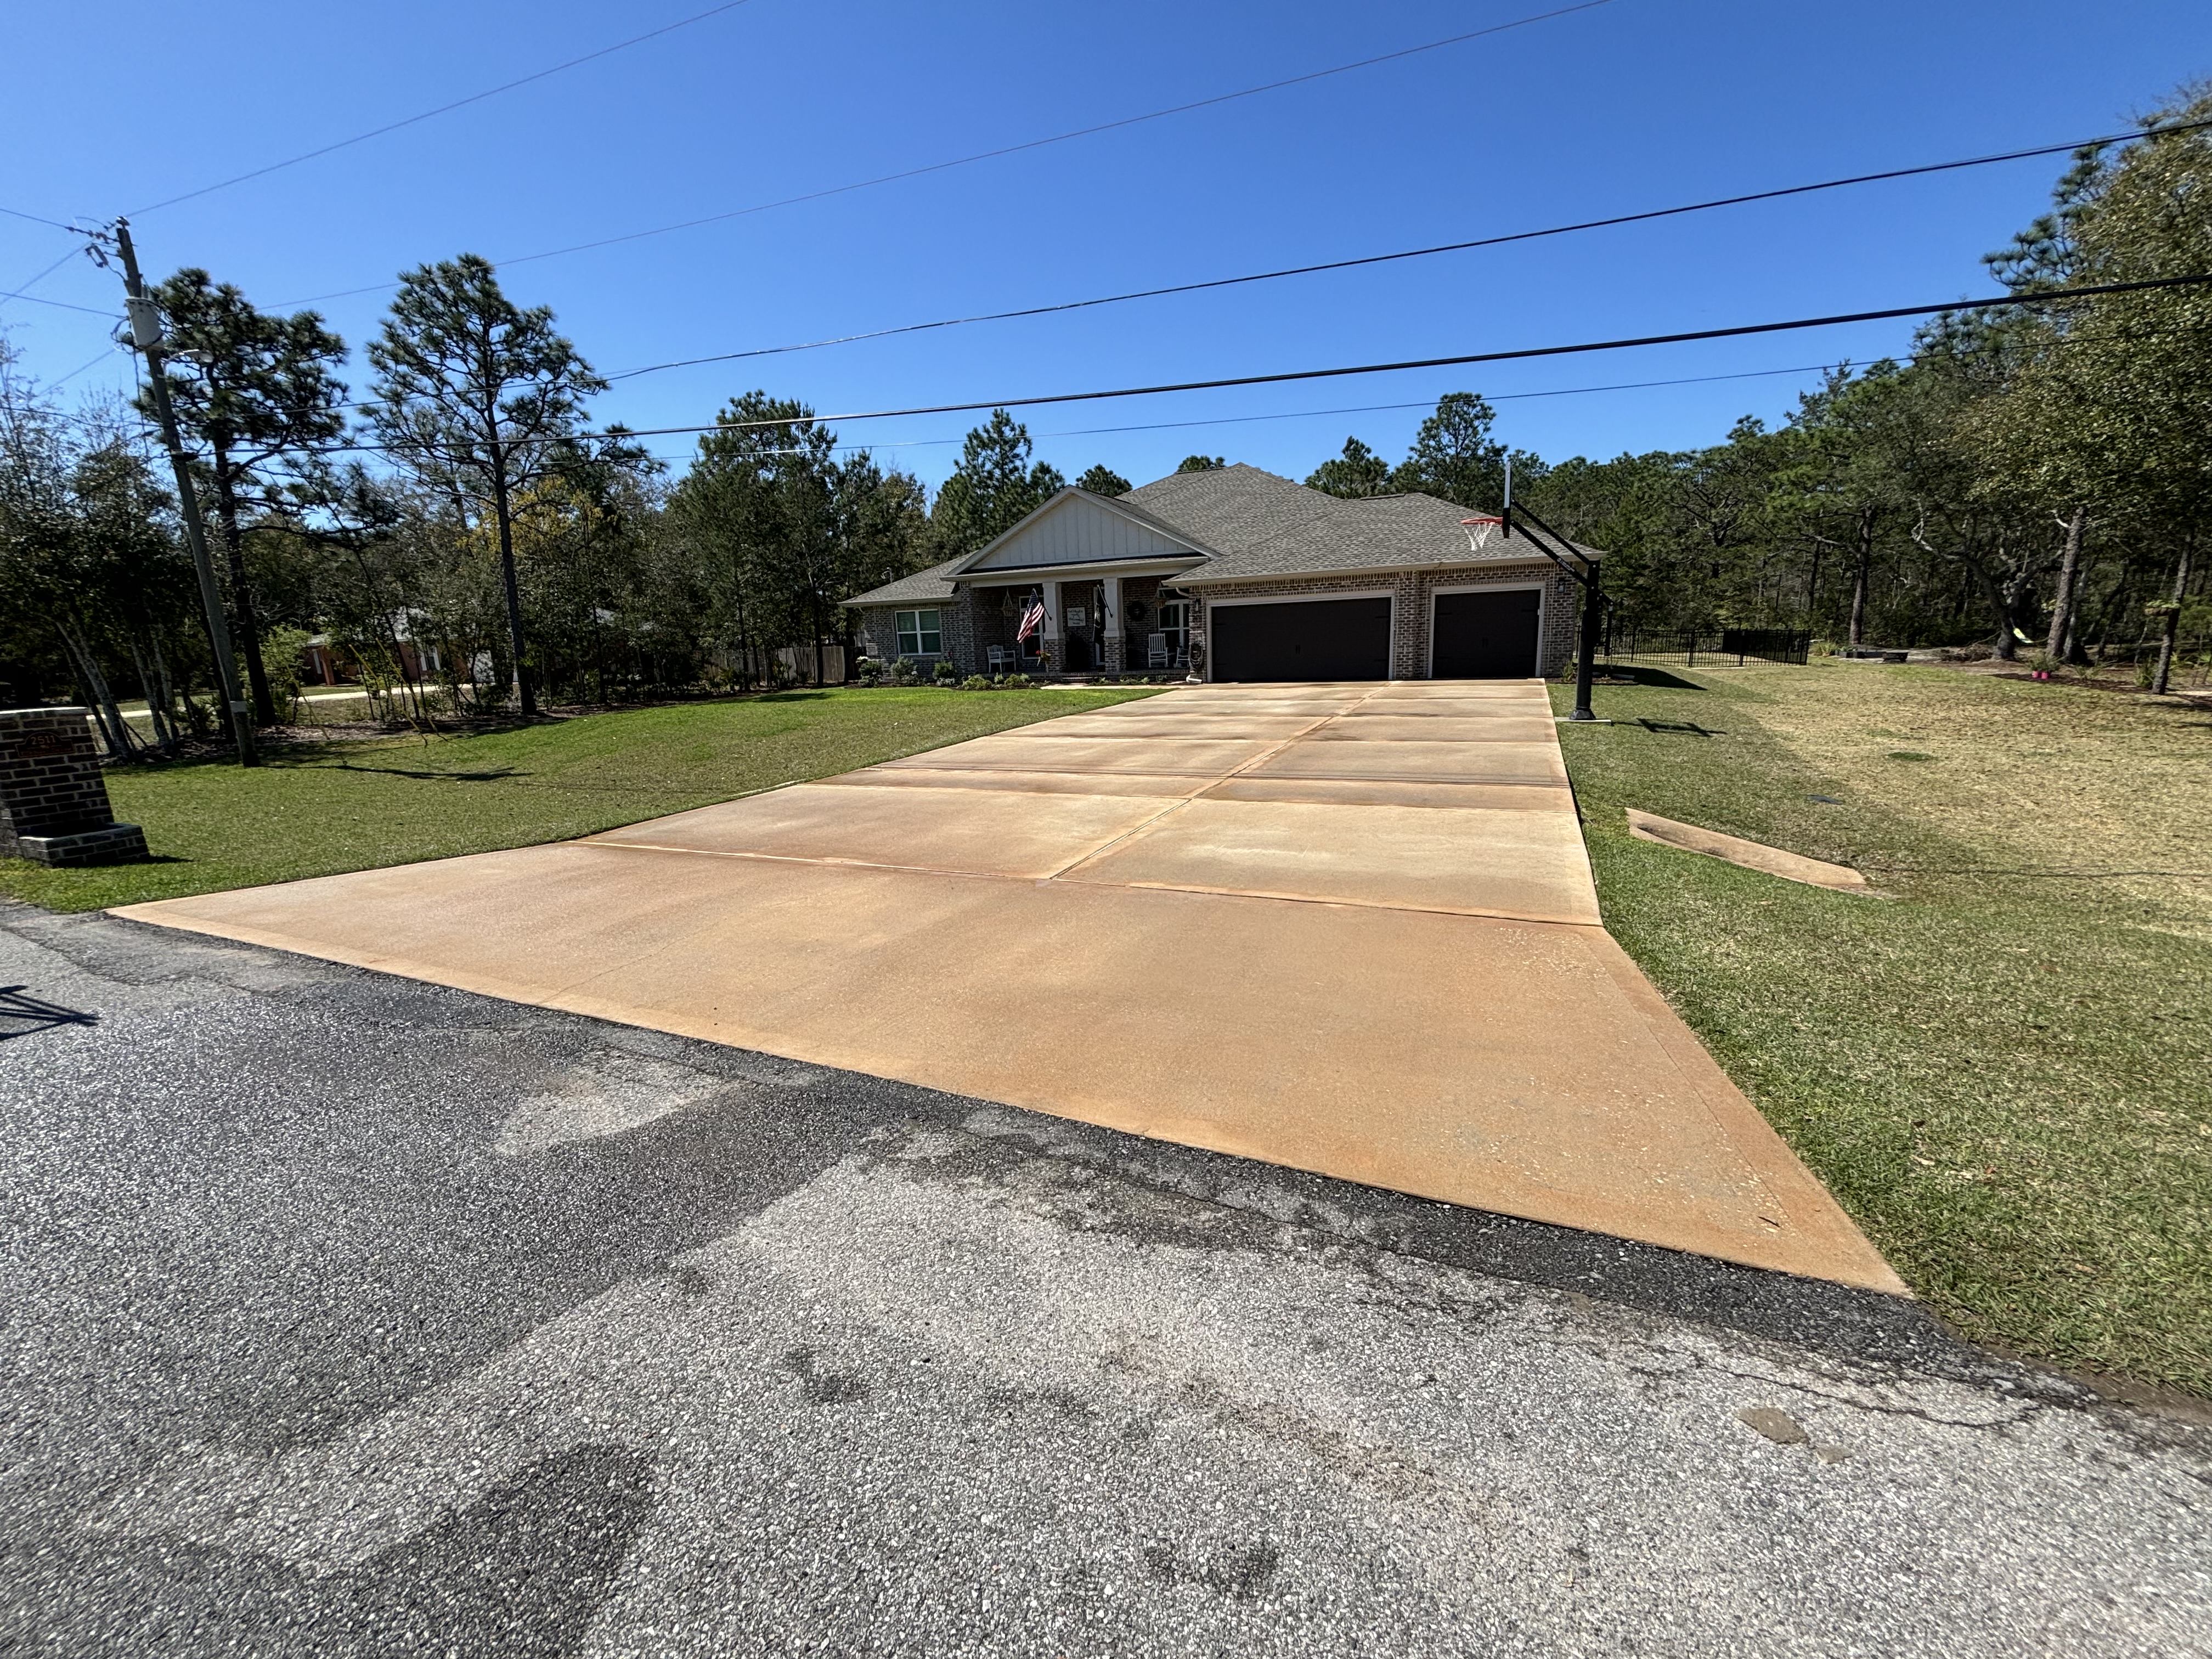 Navarre's Premier Driveway Cleaning Service: Honorable Pressure Washing Delivers Excellence